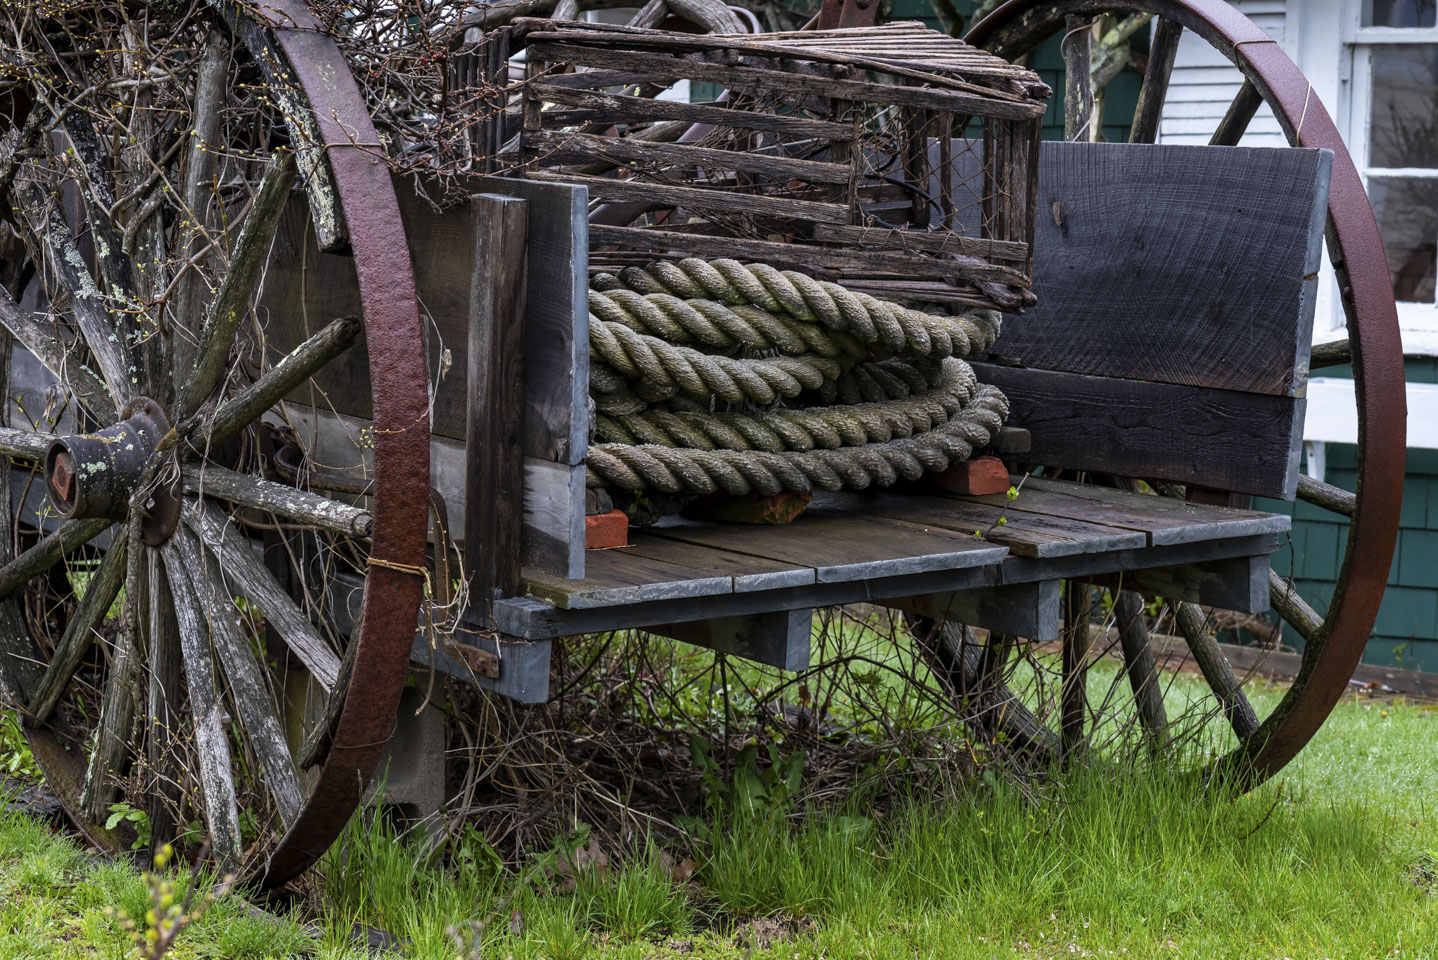 An old wagon with large wheels, with rope and a crate in the back